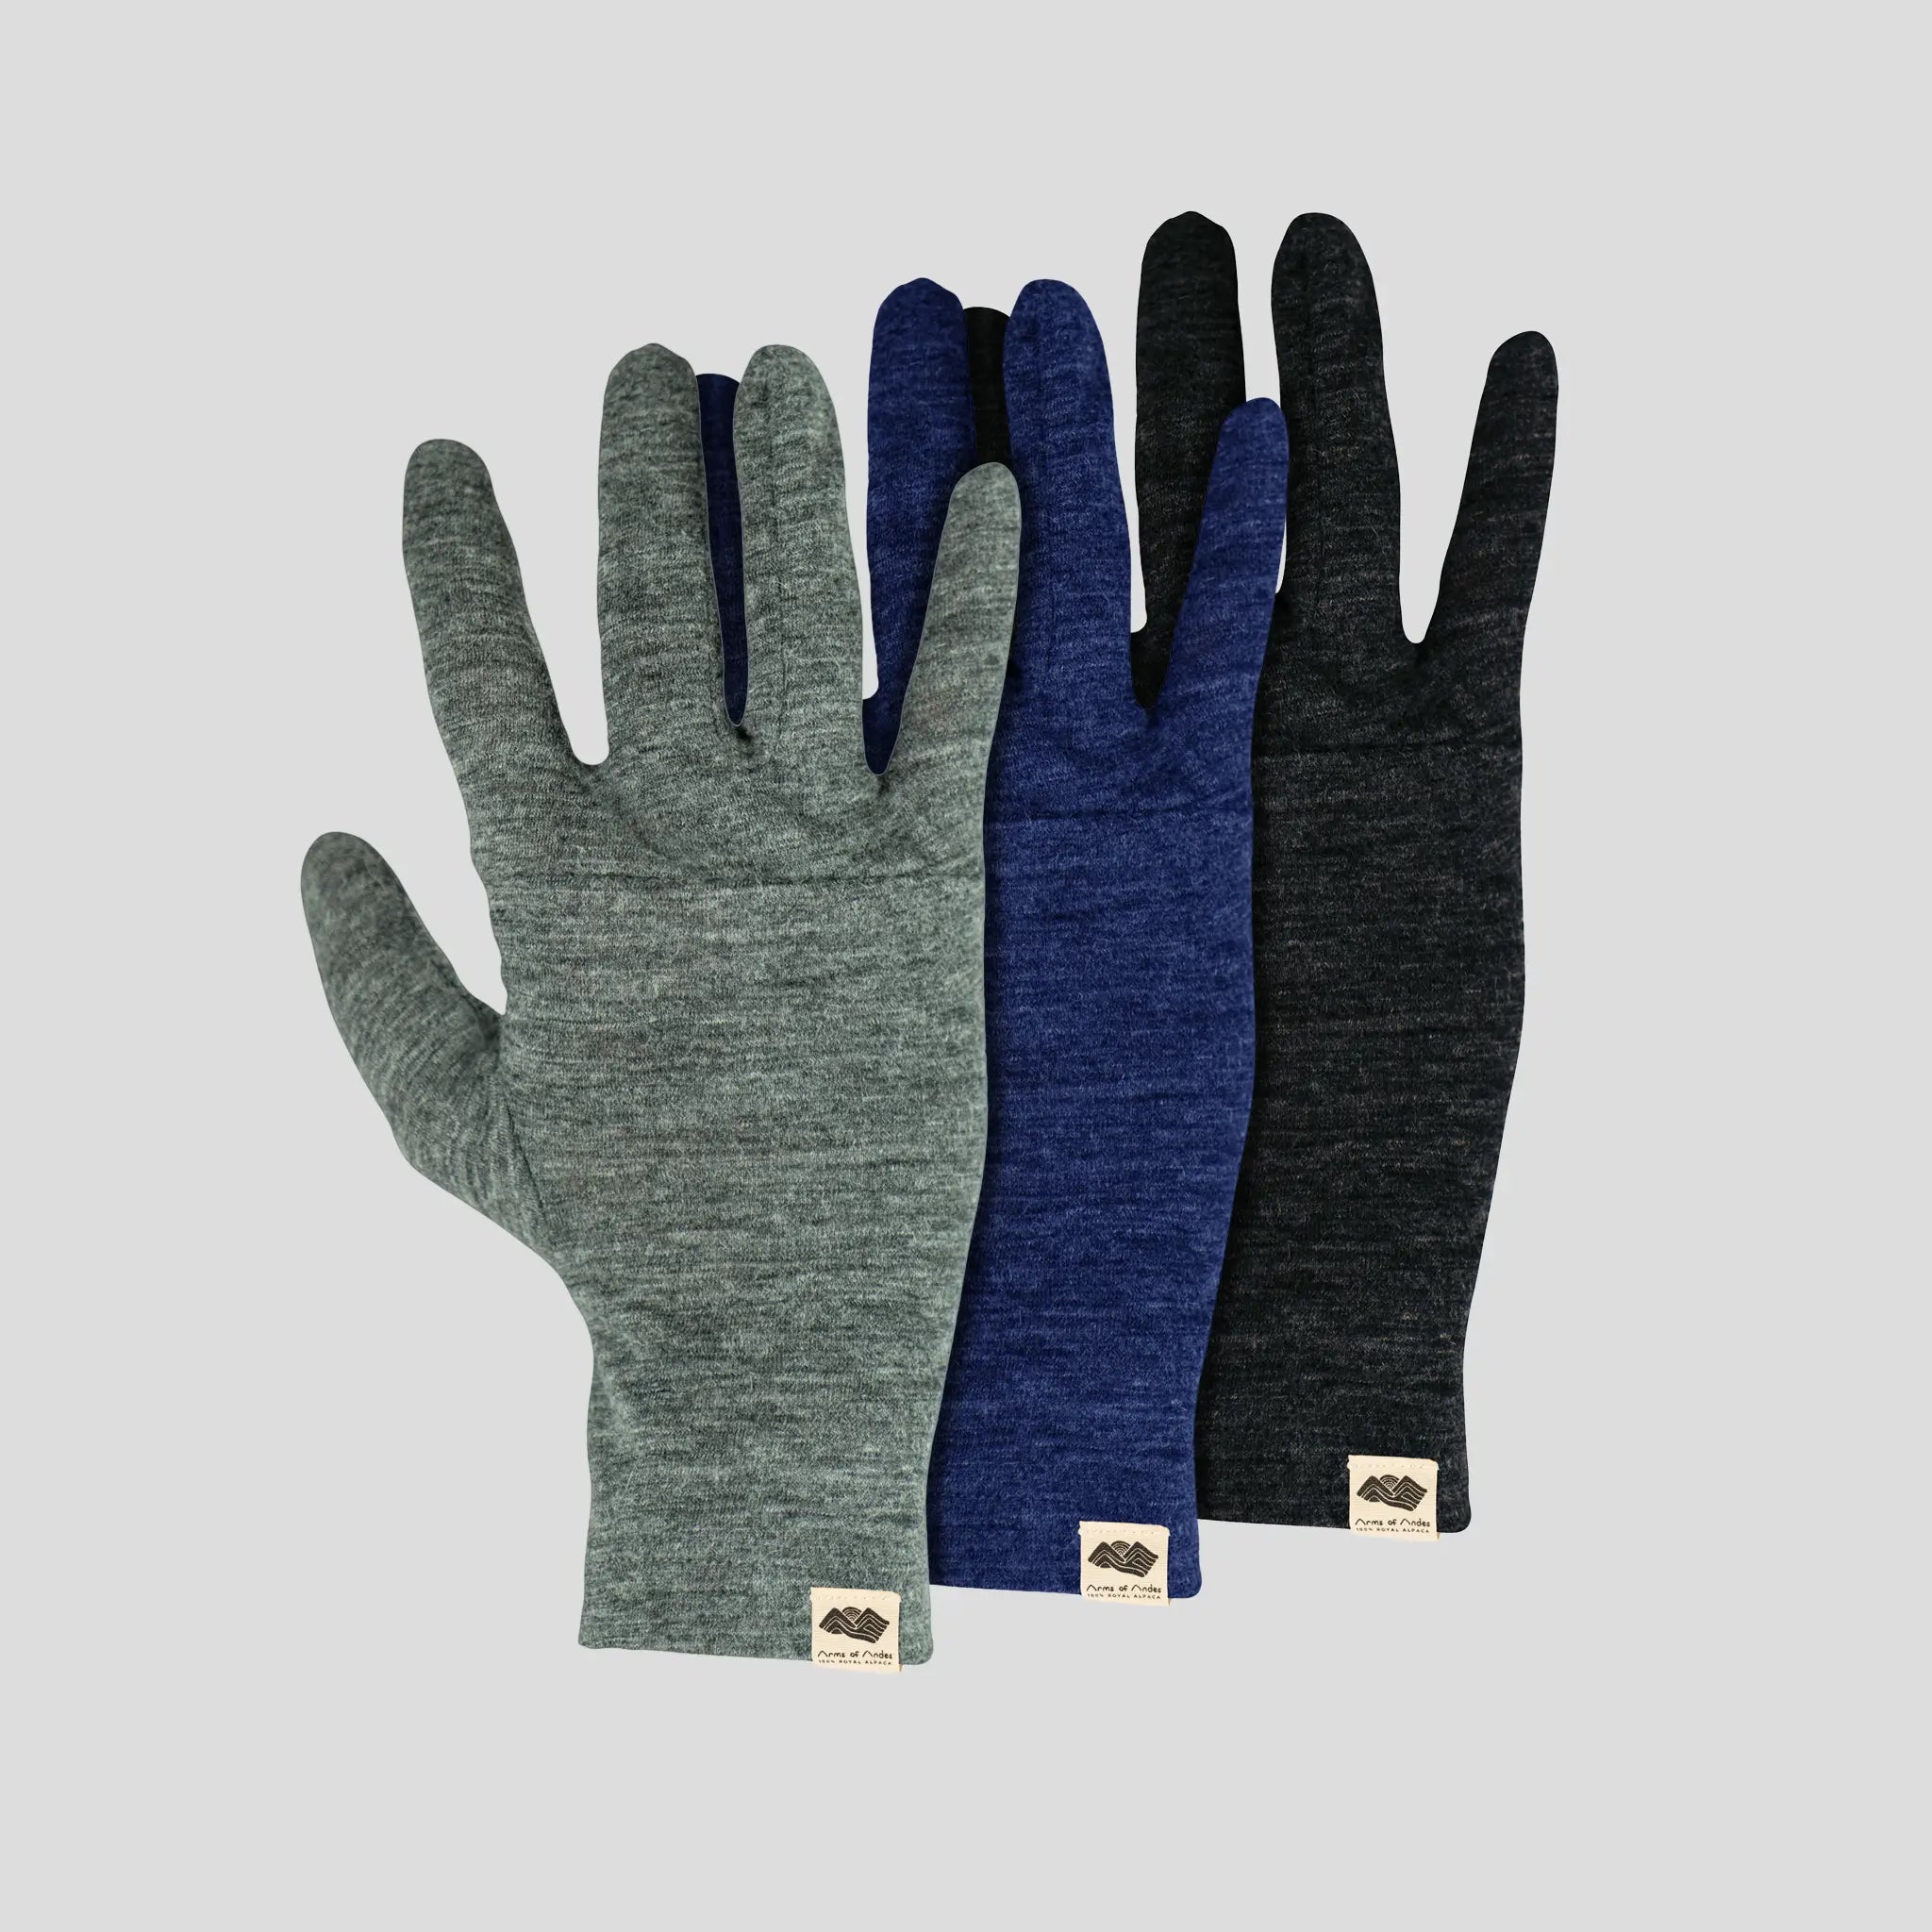 3 Pack - Unisex Glove Liners